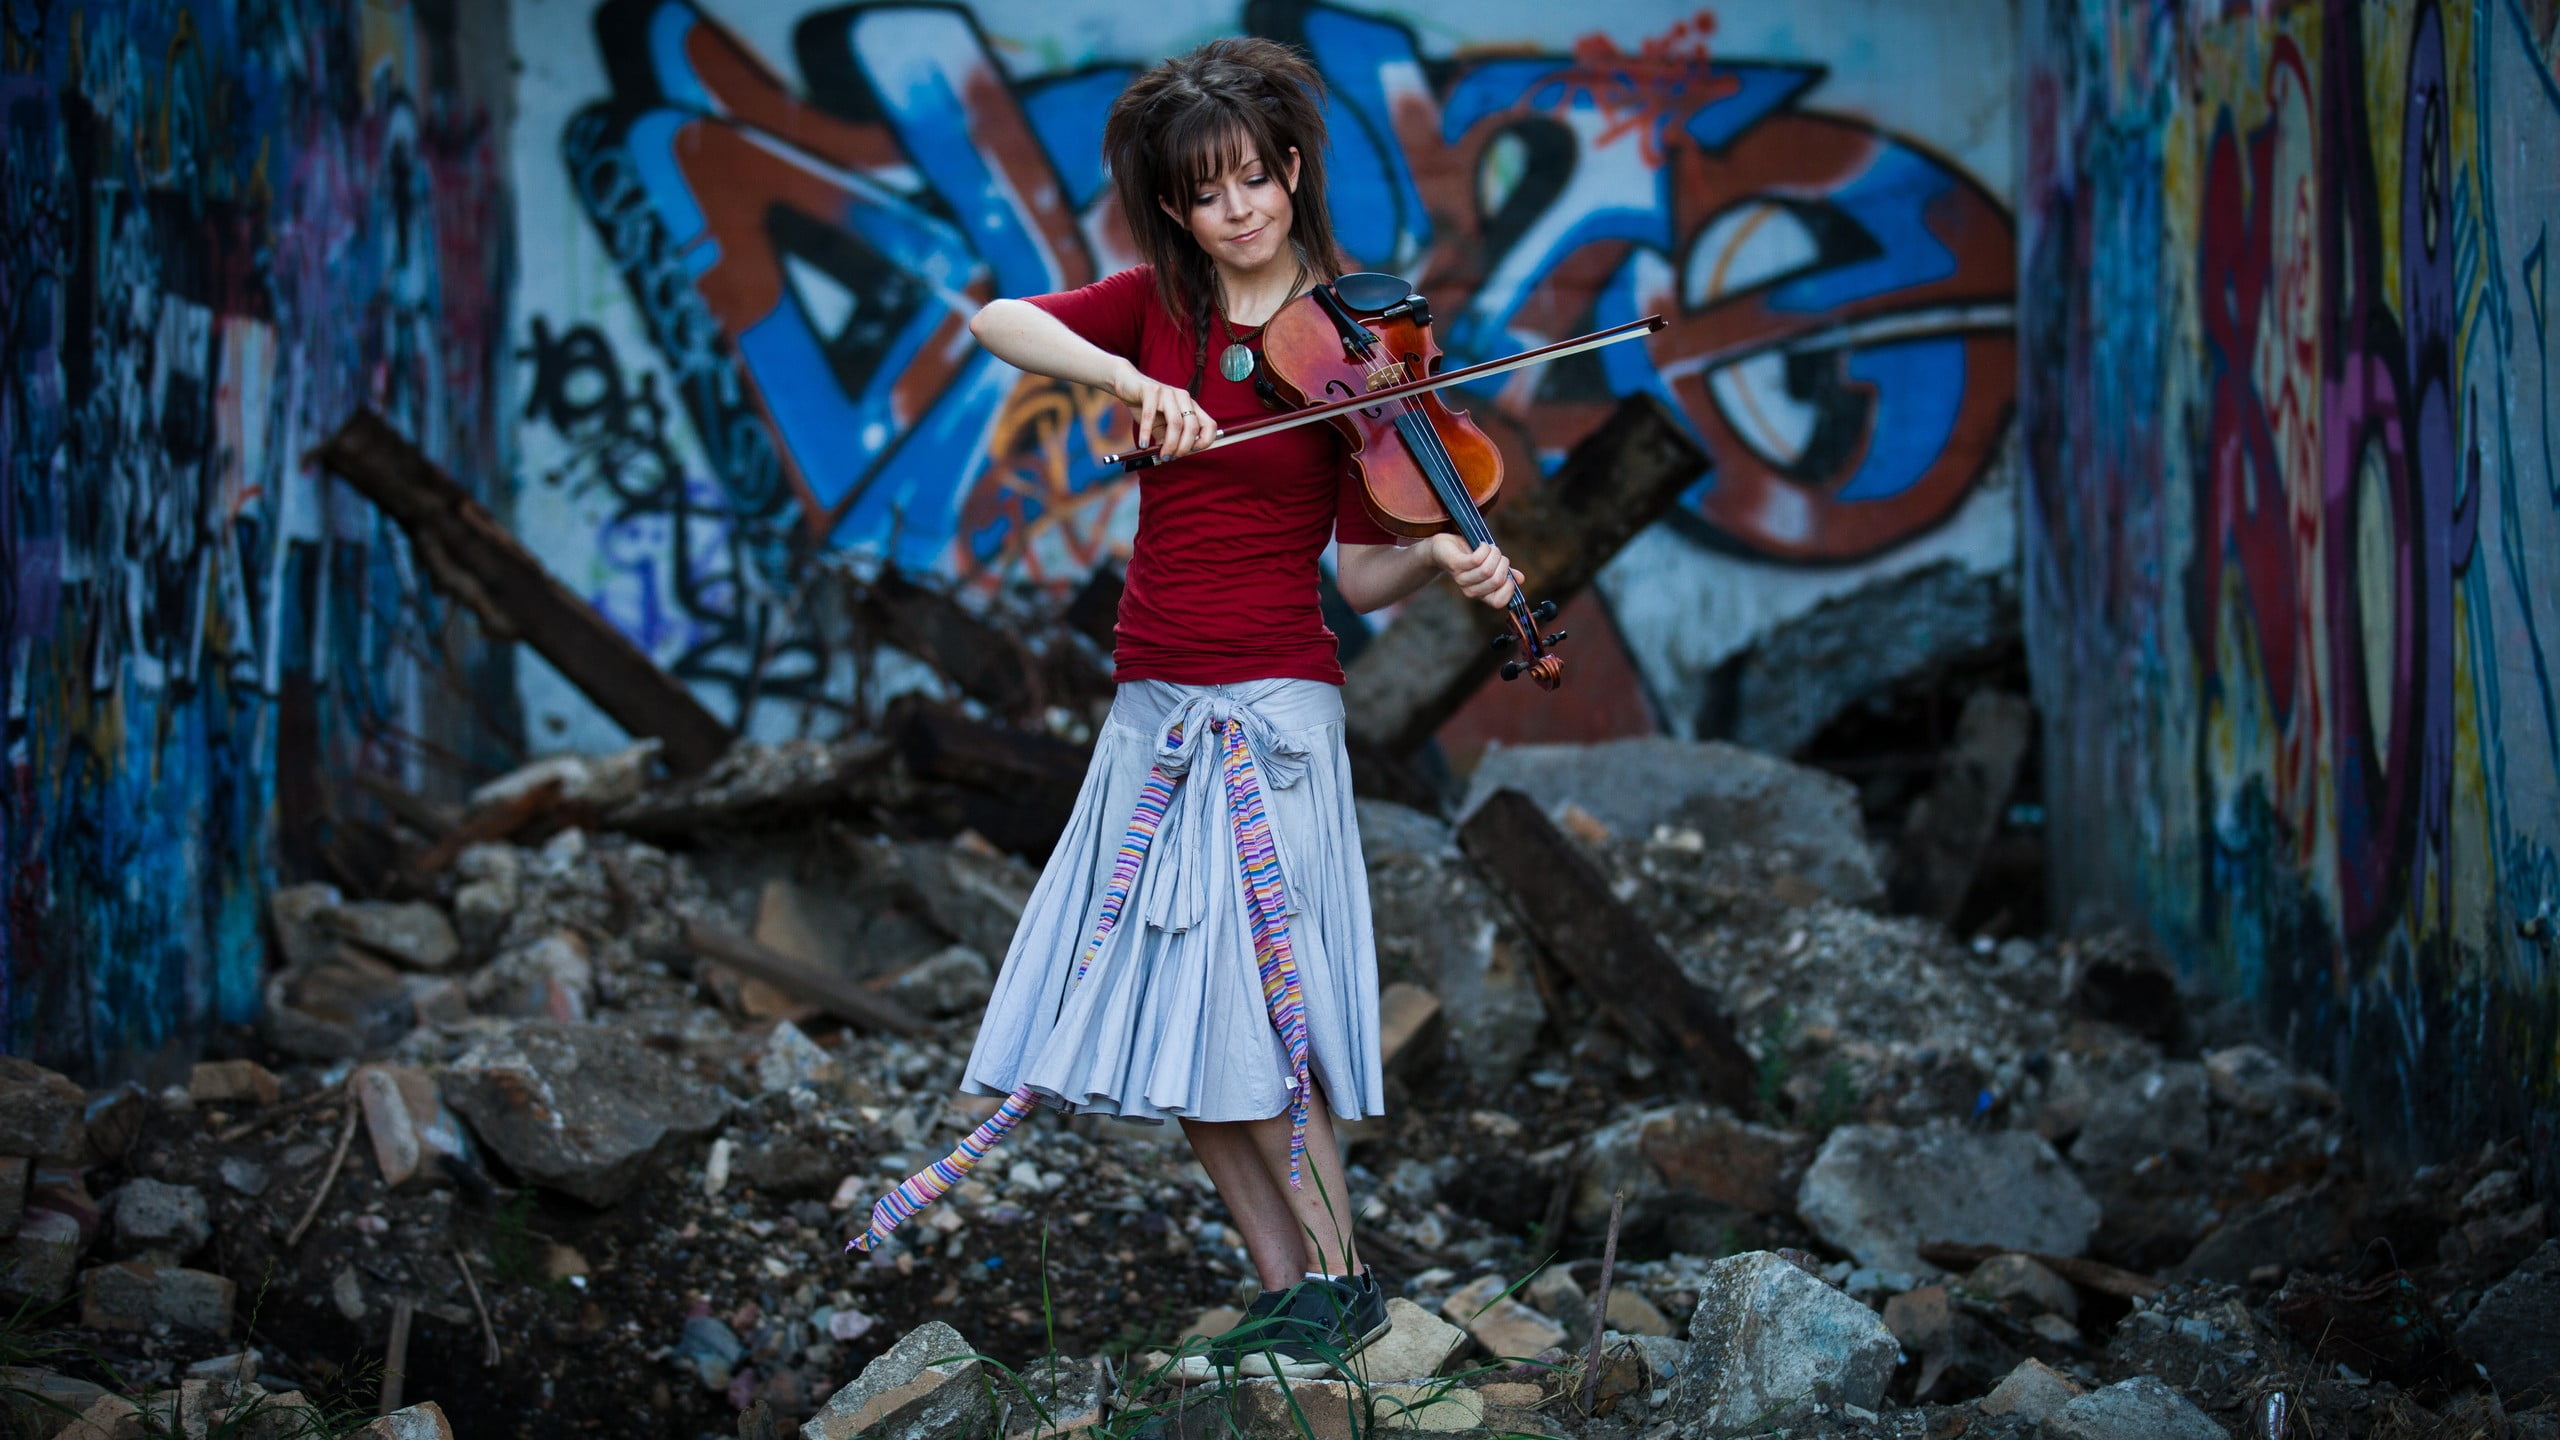 Lindsey Stirling, women, violin, skirt, one person, young adult